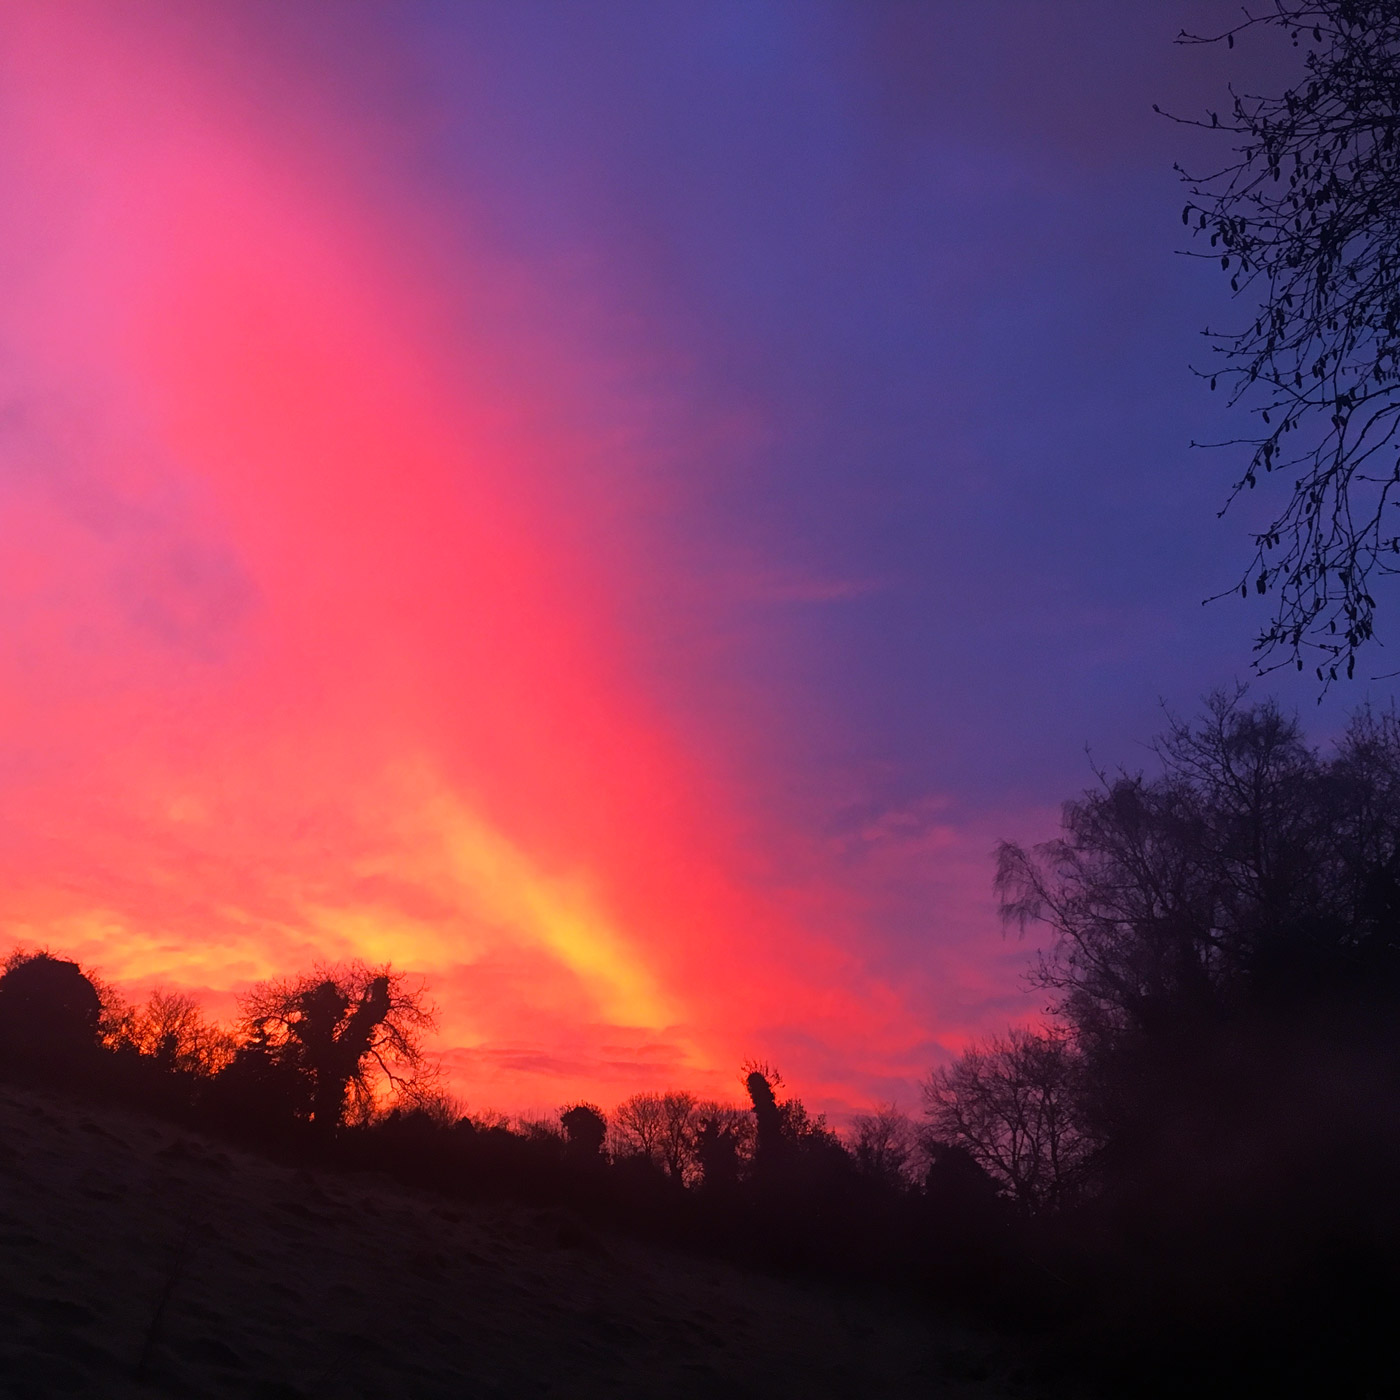 Red sky dawn in Hollyfort, Co Wexford